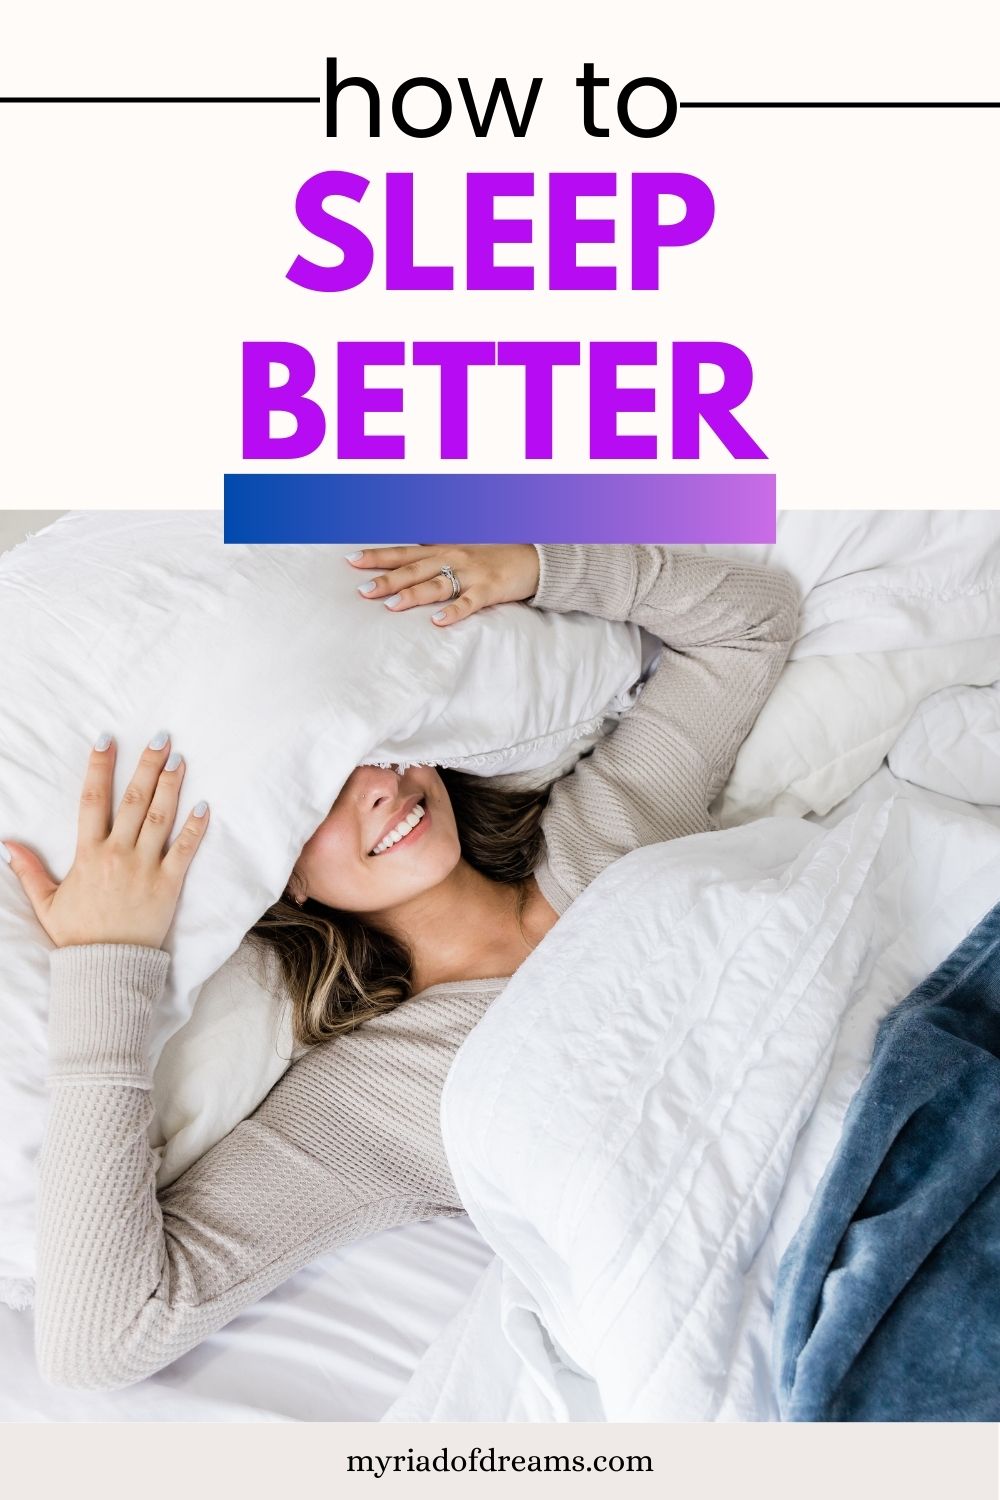 9 things to do when you can't sleep. Sleep better with these practical sleeping hacks.